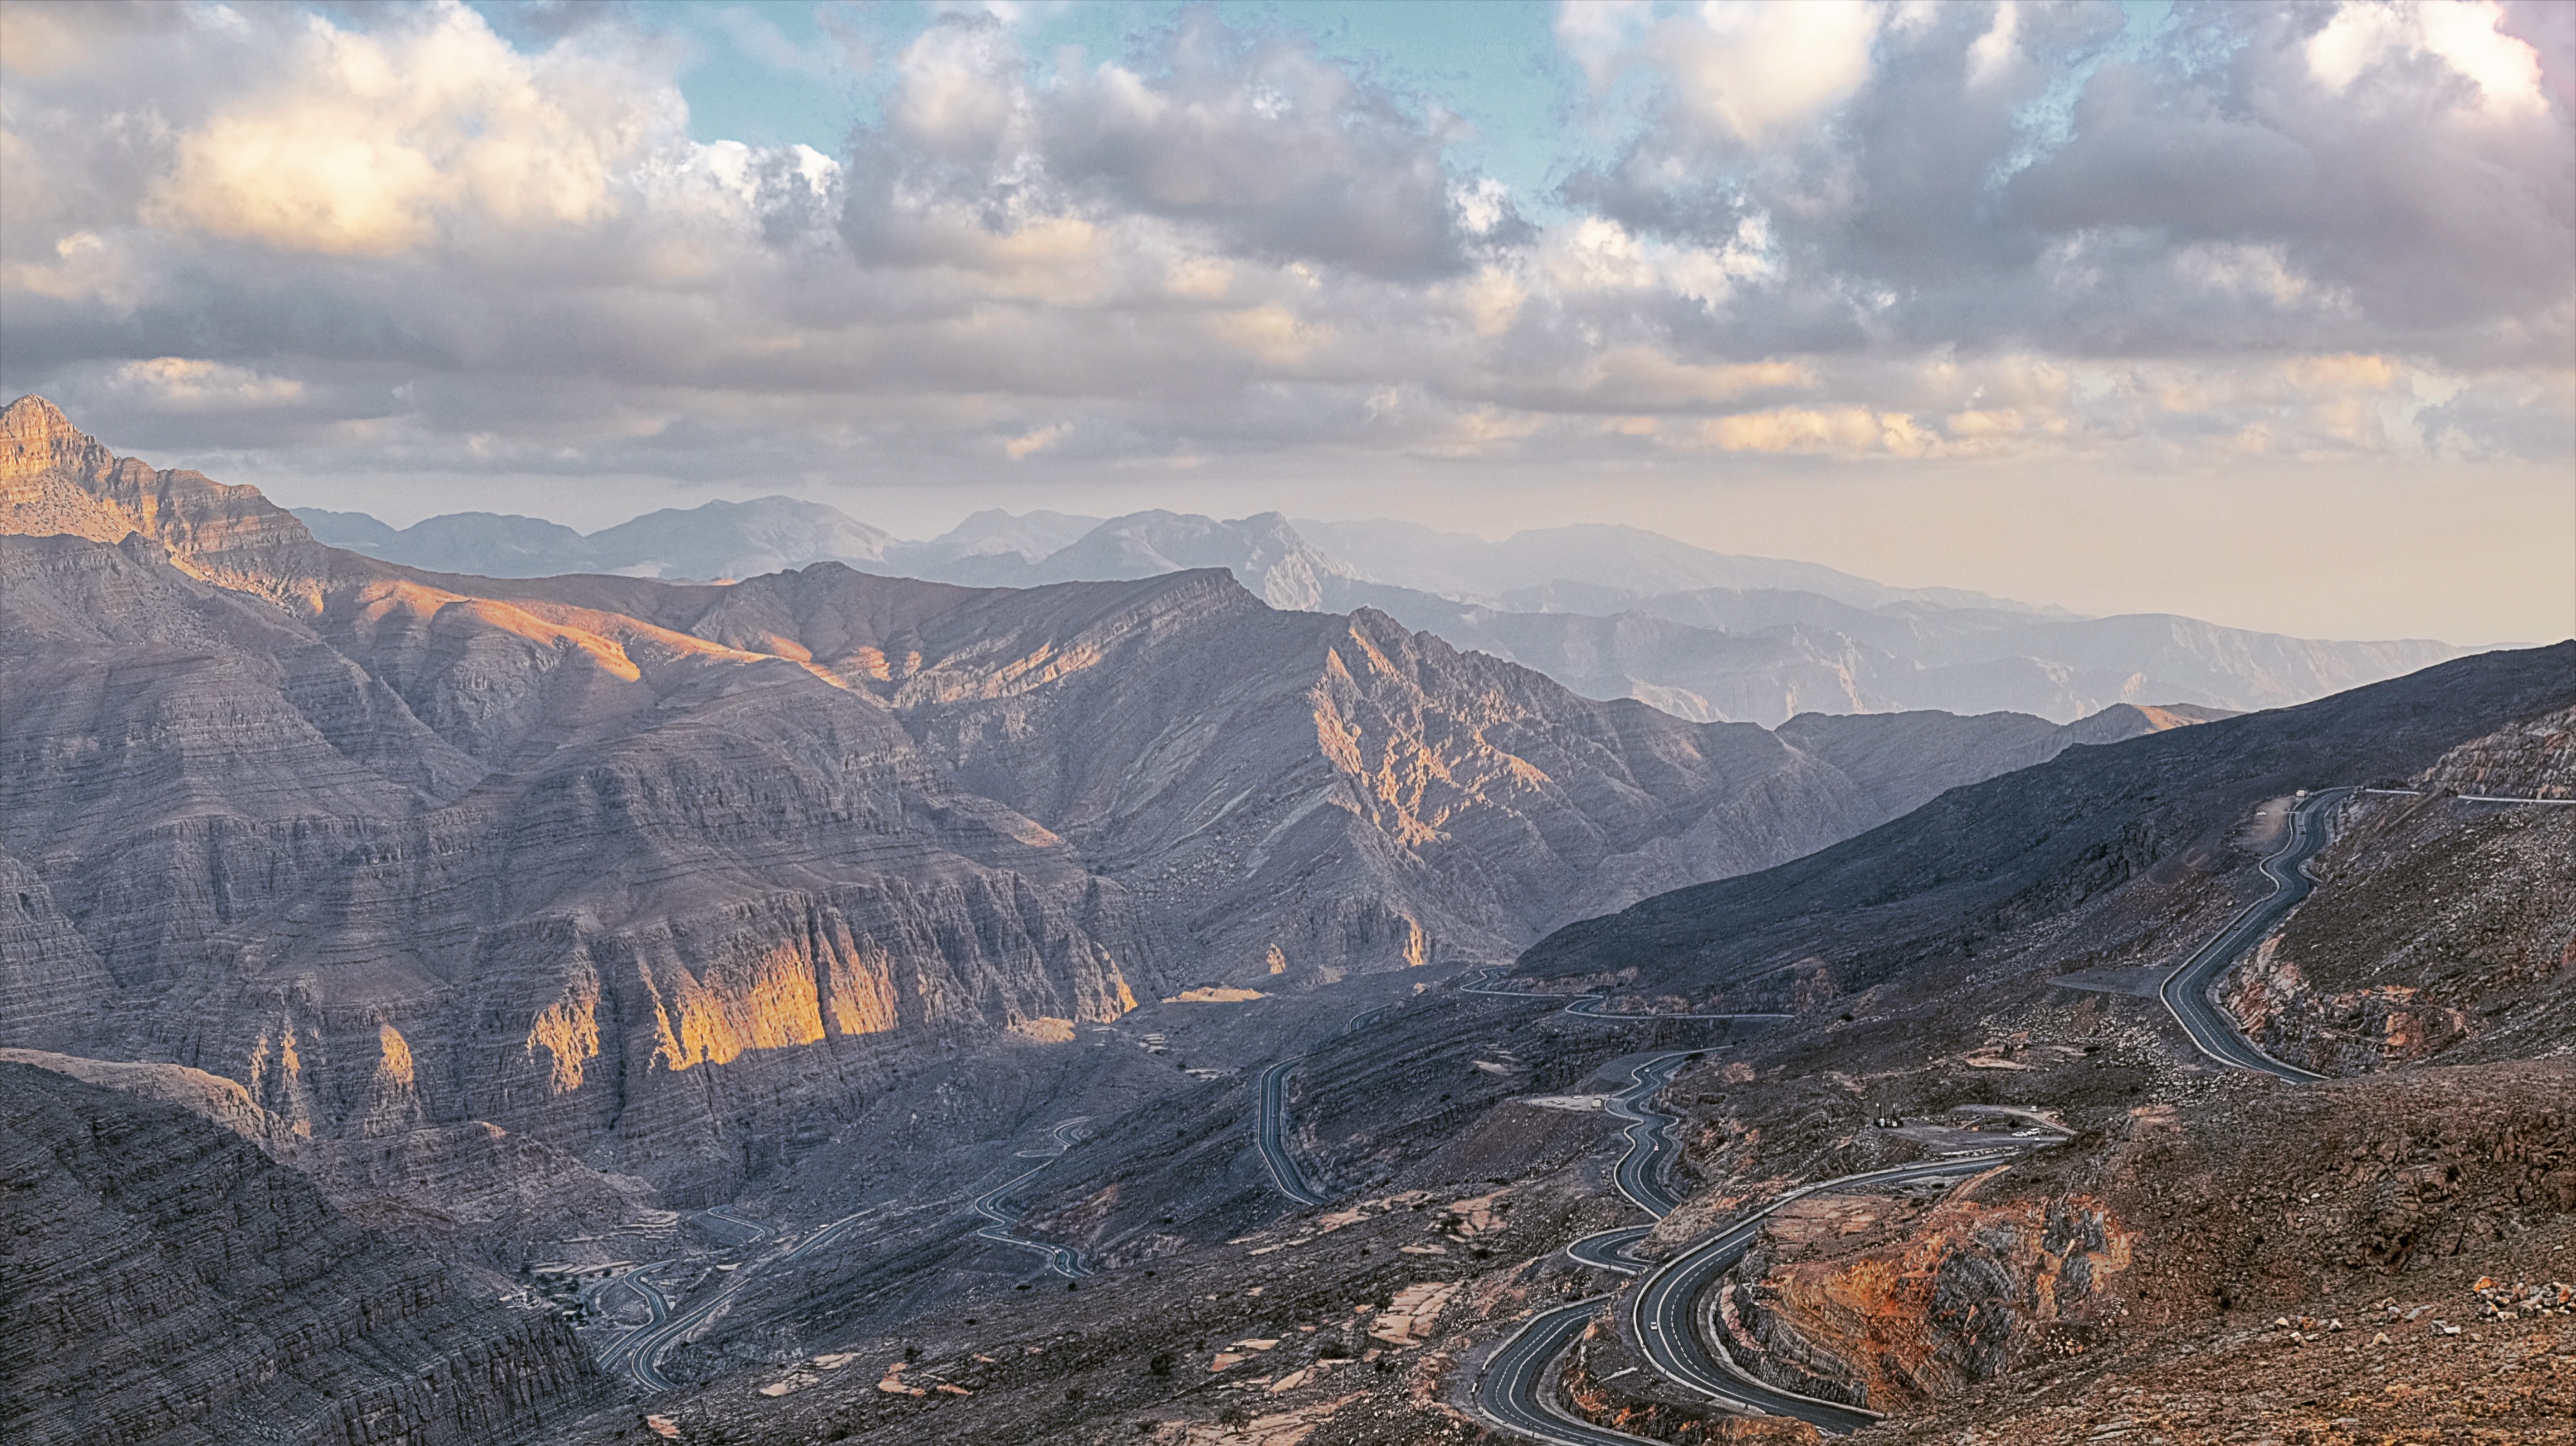 Breathtaking view of Jebel Jais mountains with winding roads and clear blue sky